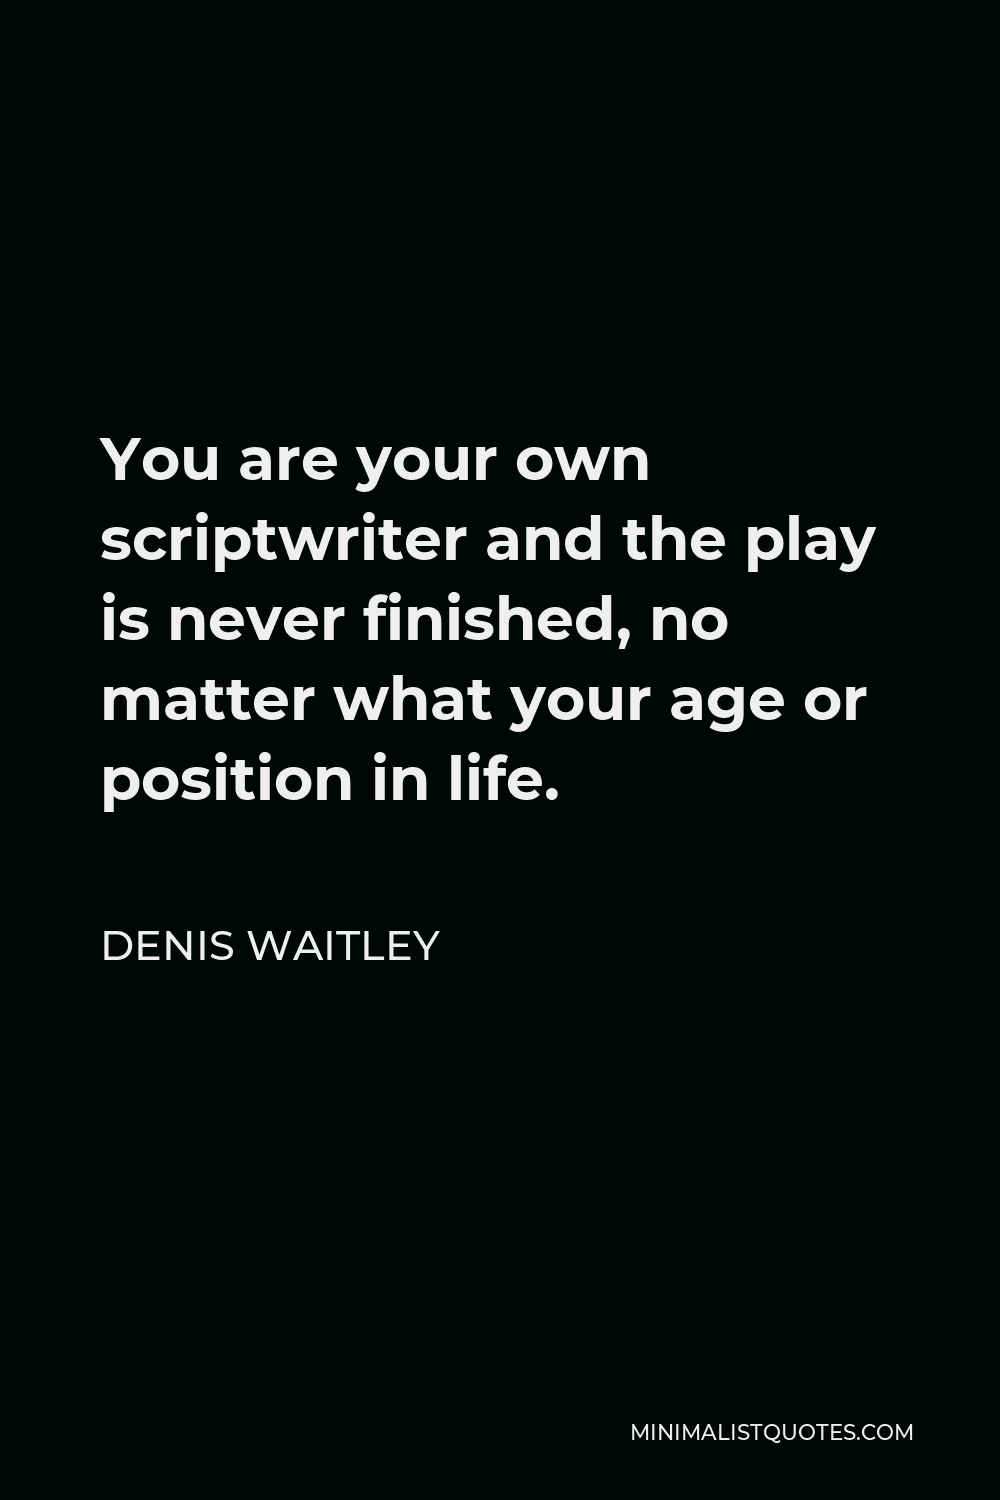 Denis Waitley Quote - You are your own scriptwriter and the play is never finished, no matter what your age or position in life.